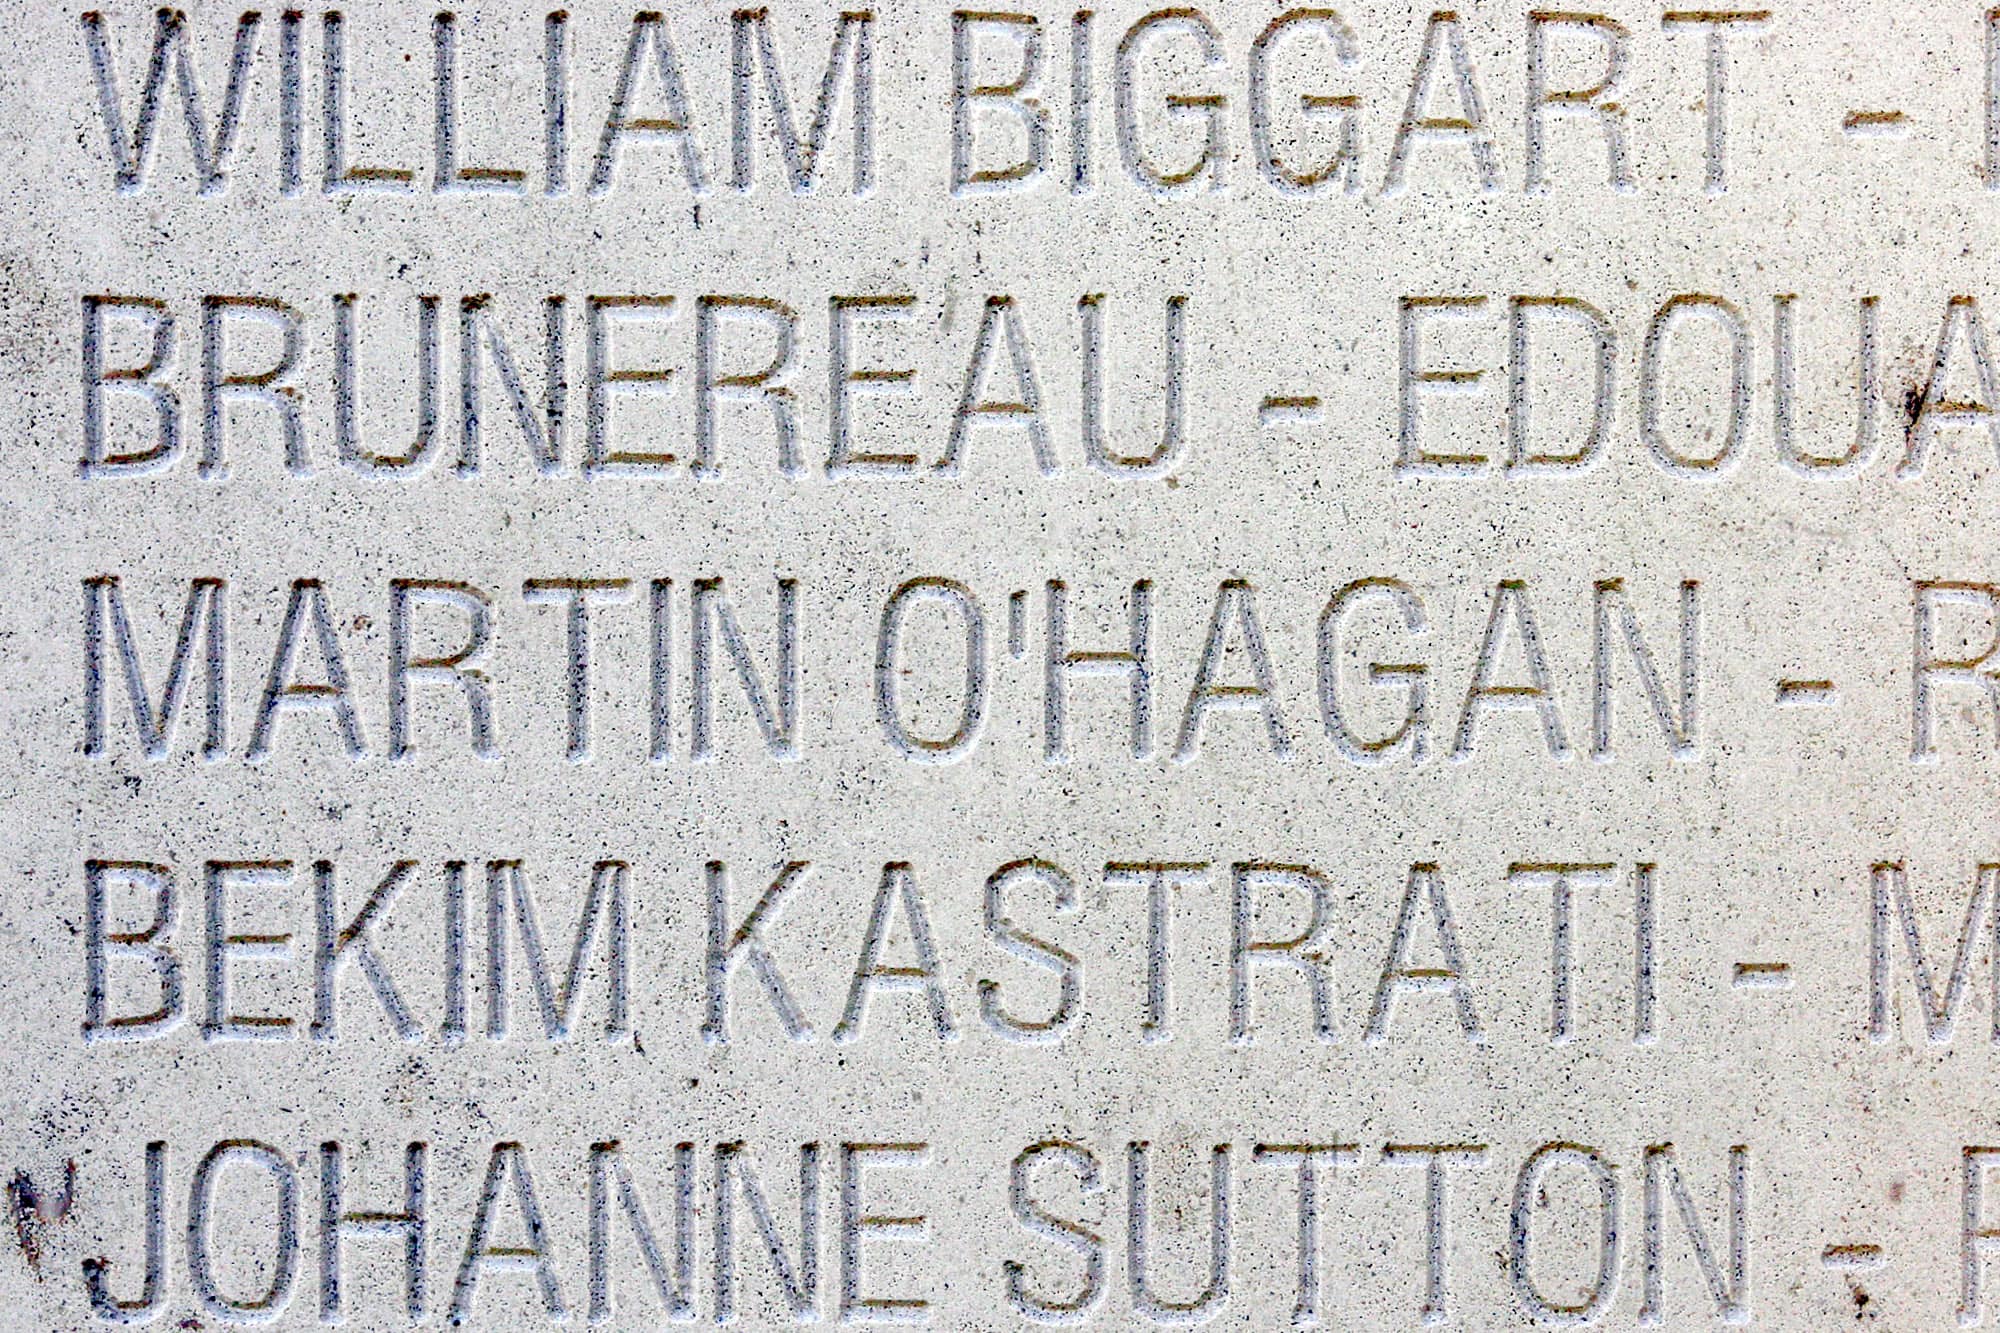 The name of Martin O'Hagan is seen engraved amongst other names on a white stone on 7 October 2006, during the inauguration of the Journalists Memorial of Bayeux, Normandy., AP Photo/Laurent Rebours